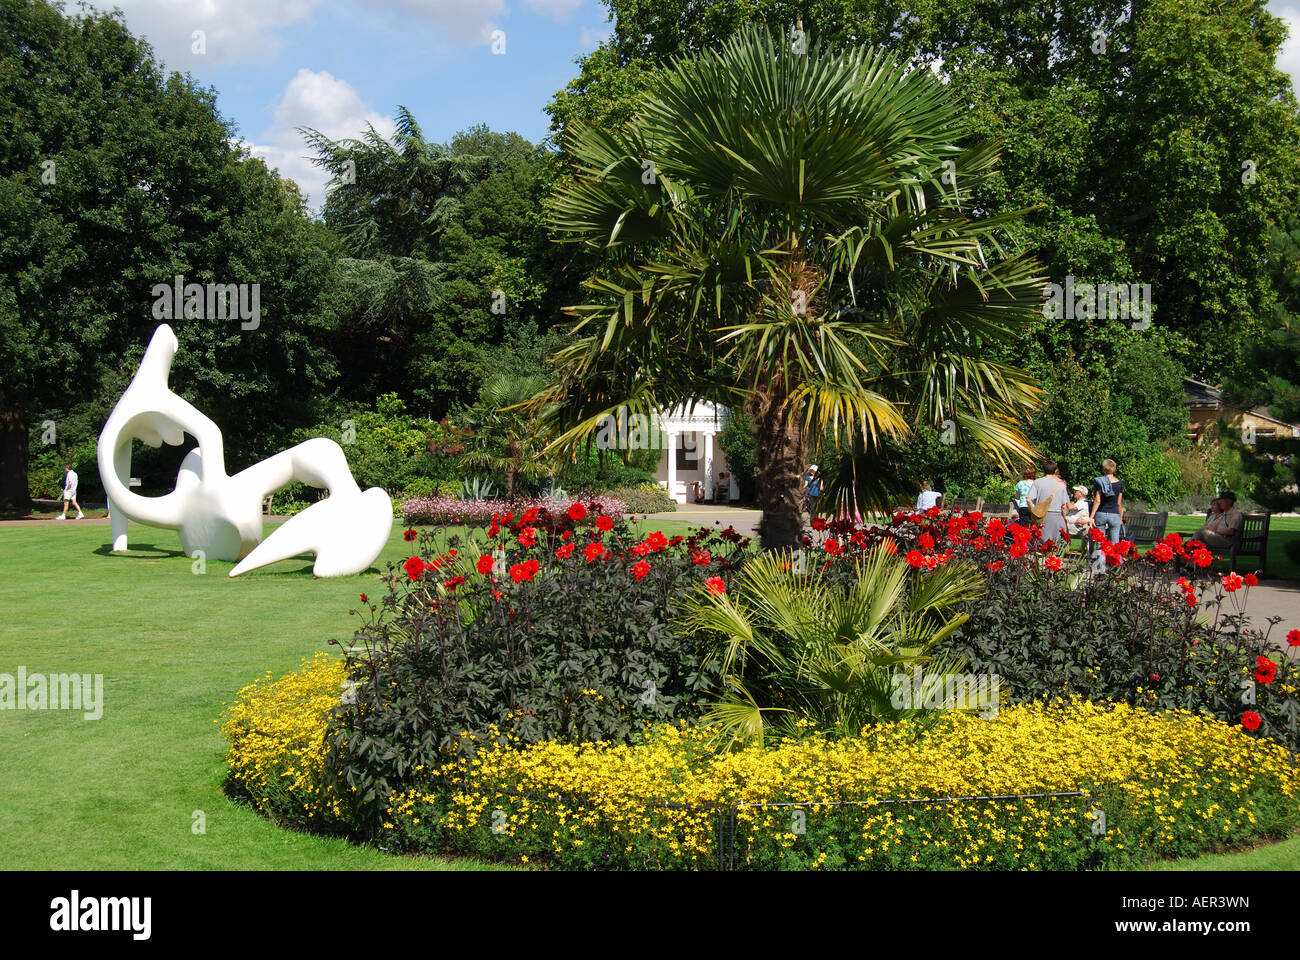 Henry Moore sculpture on lawn, Royal Botanical Gardens, Kew, London Borough of Richmond upon Thames, Greater London, England, United Kingdom Stock Photo